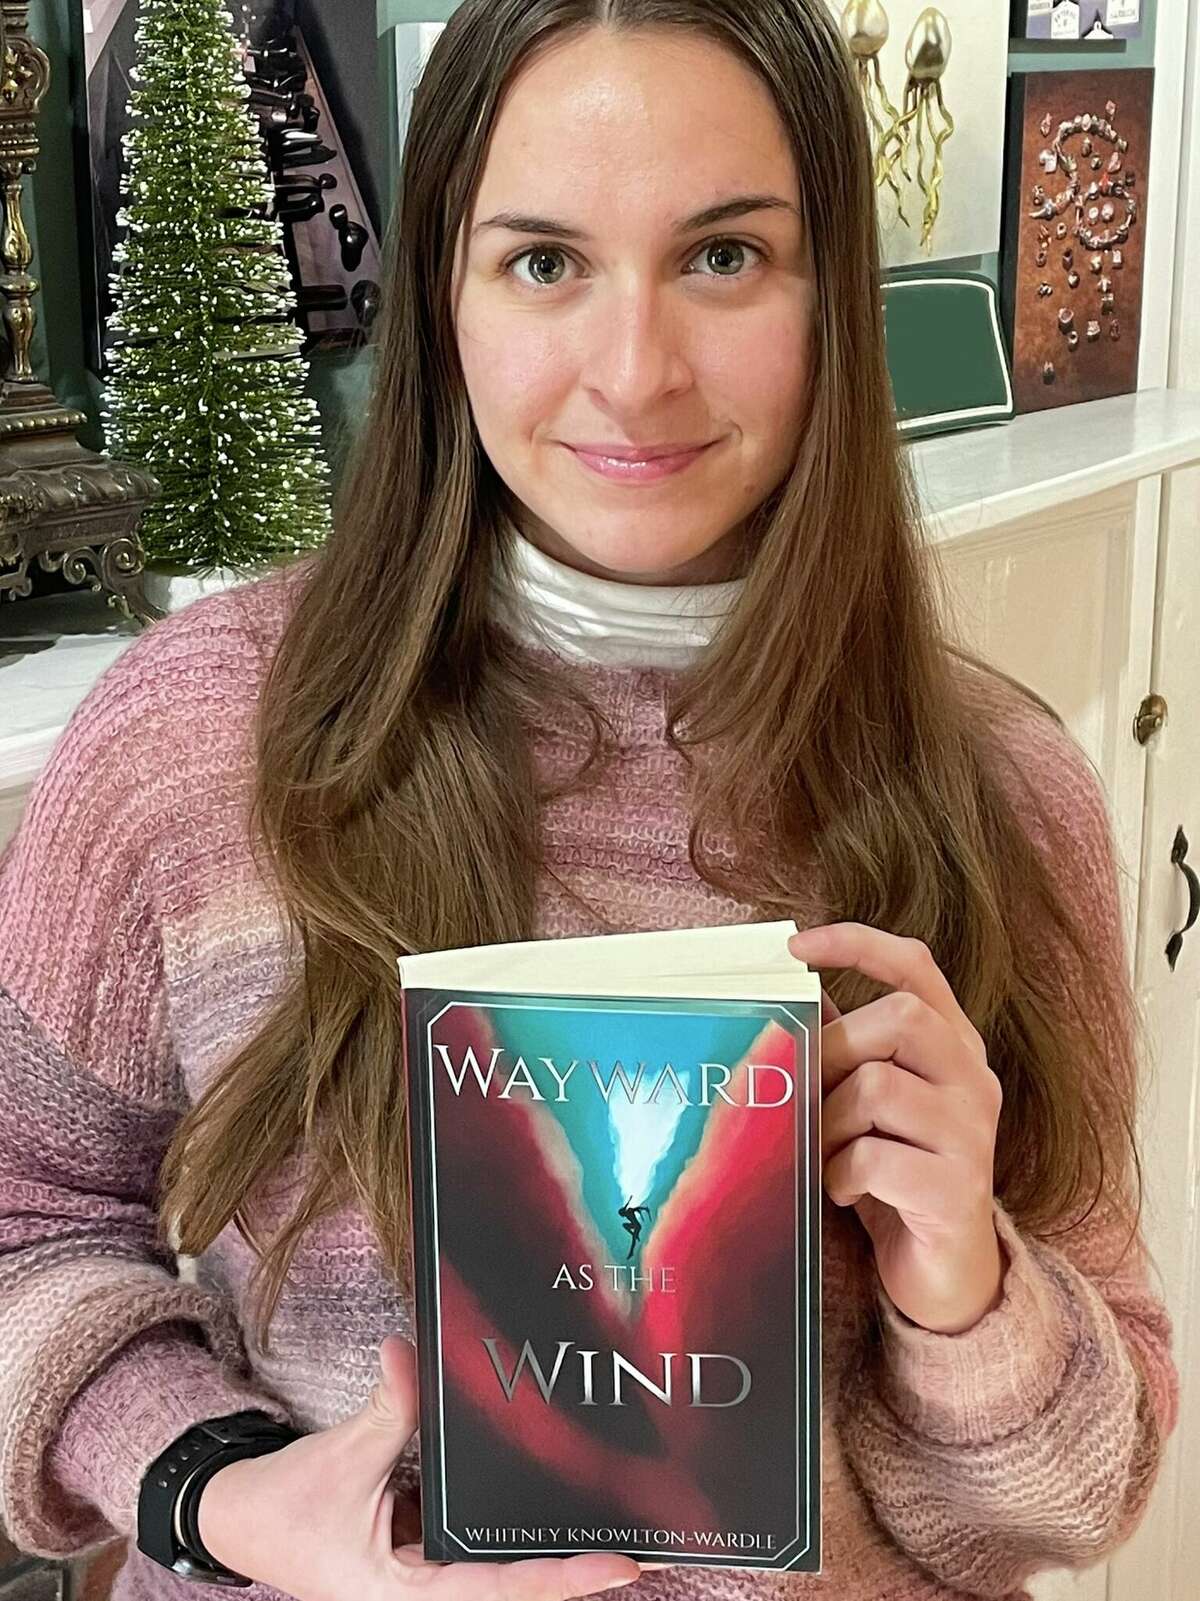 Whitney Knowlton-Wardle published “Wayward as the Wind” on Nov. 6 with Pencil Hill Press. The writer, a 2019 SUNY New Paltz grad, used the surrounding history and landscape to inspire her richly imagined fantasy world.